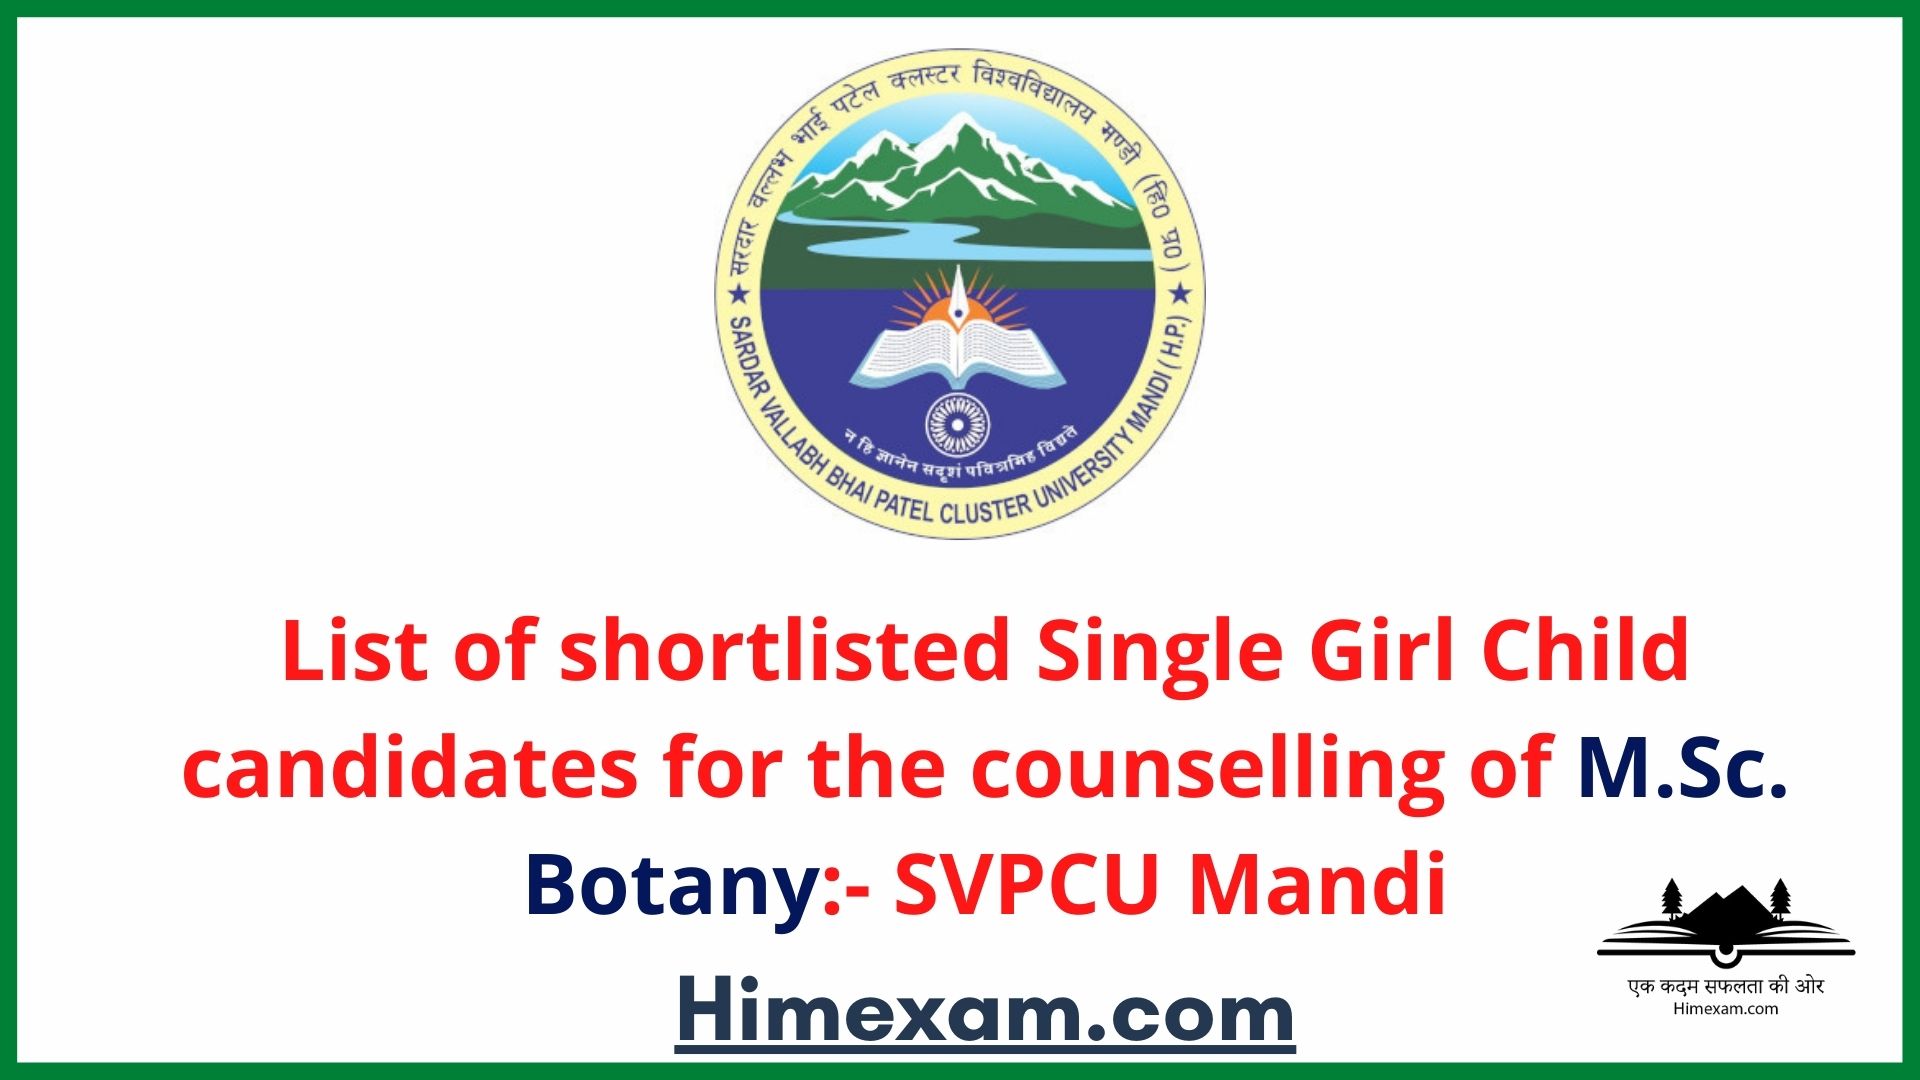 List of shortlisted Single Girl Child candidates for the counselling of M.Sc. Botany:- SVPCU Mandi